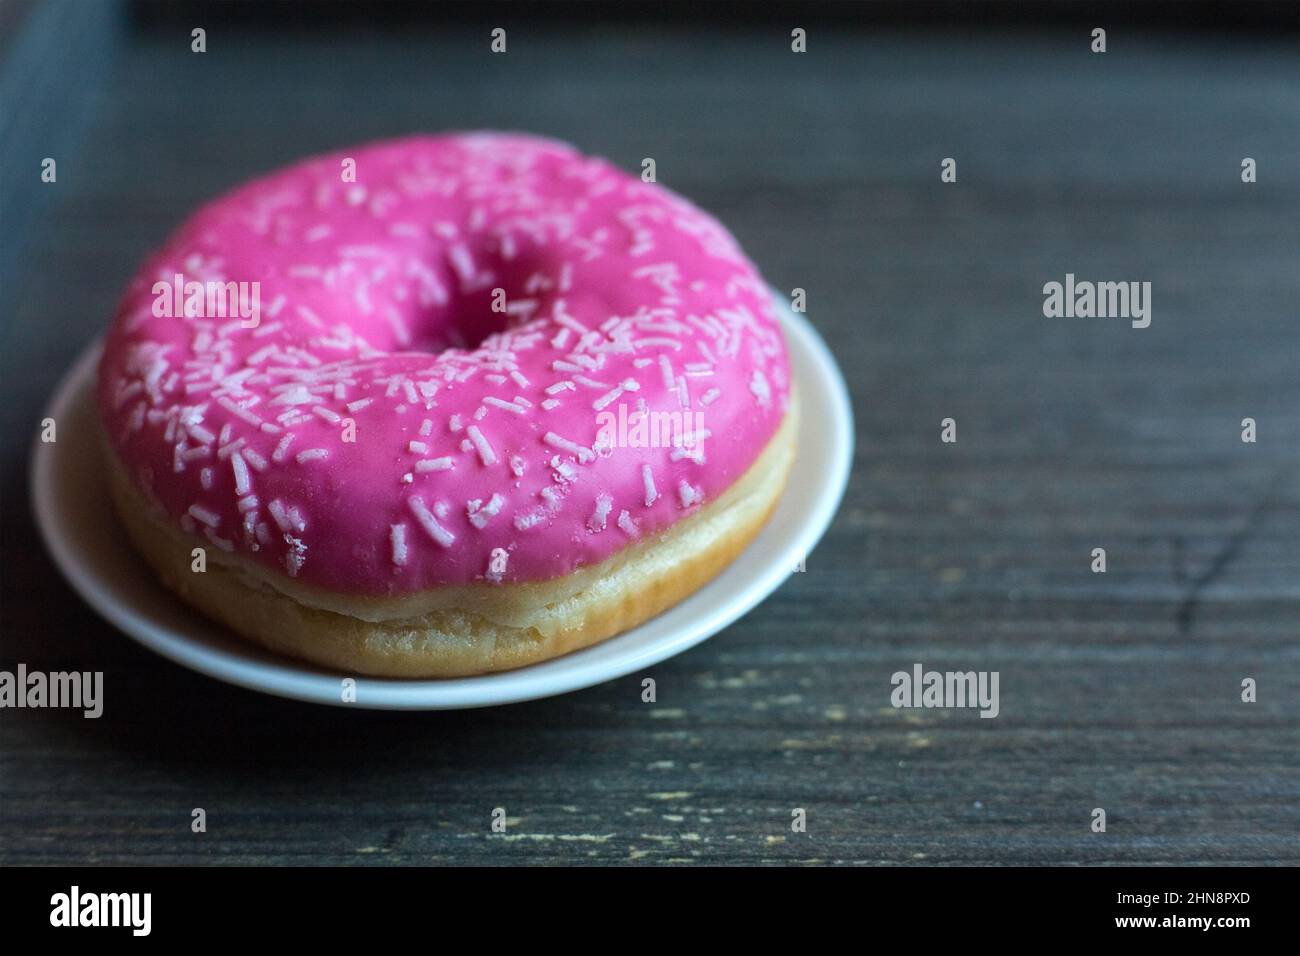 side view to bright pink donut on white round plate and aged wooden grey background. Isolated object close up. Traditional American sweets for Stock Photo